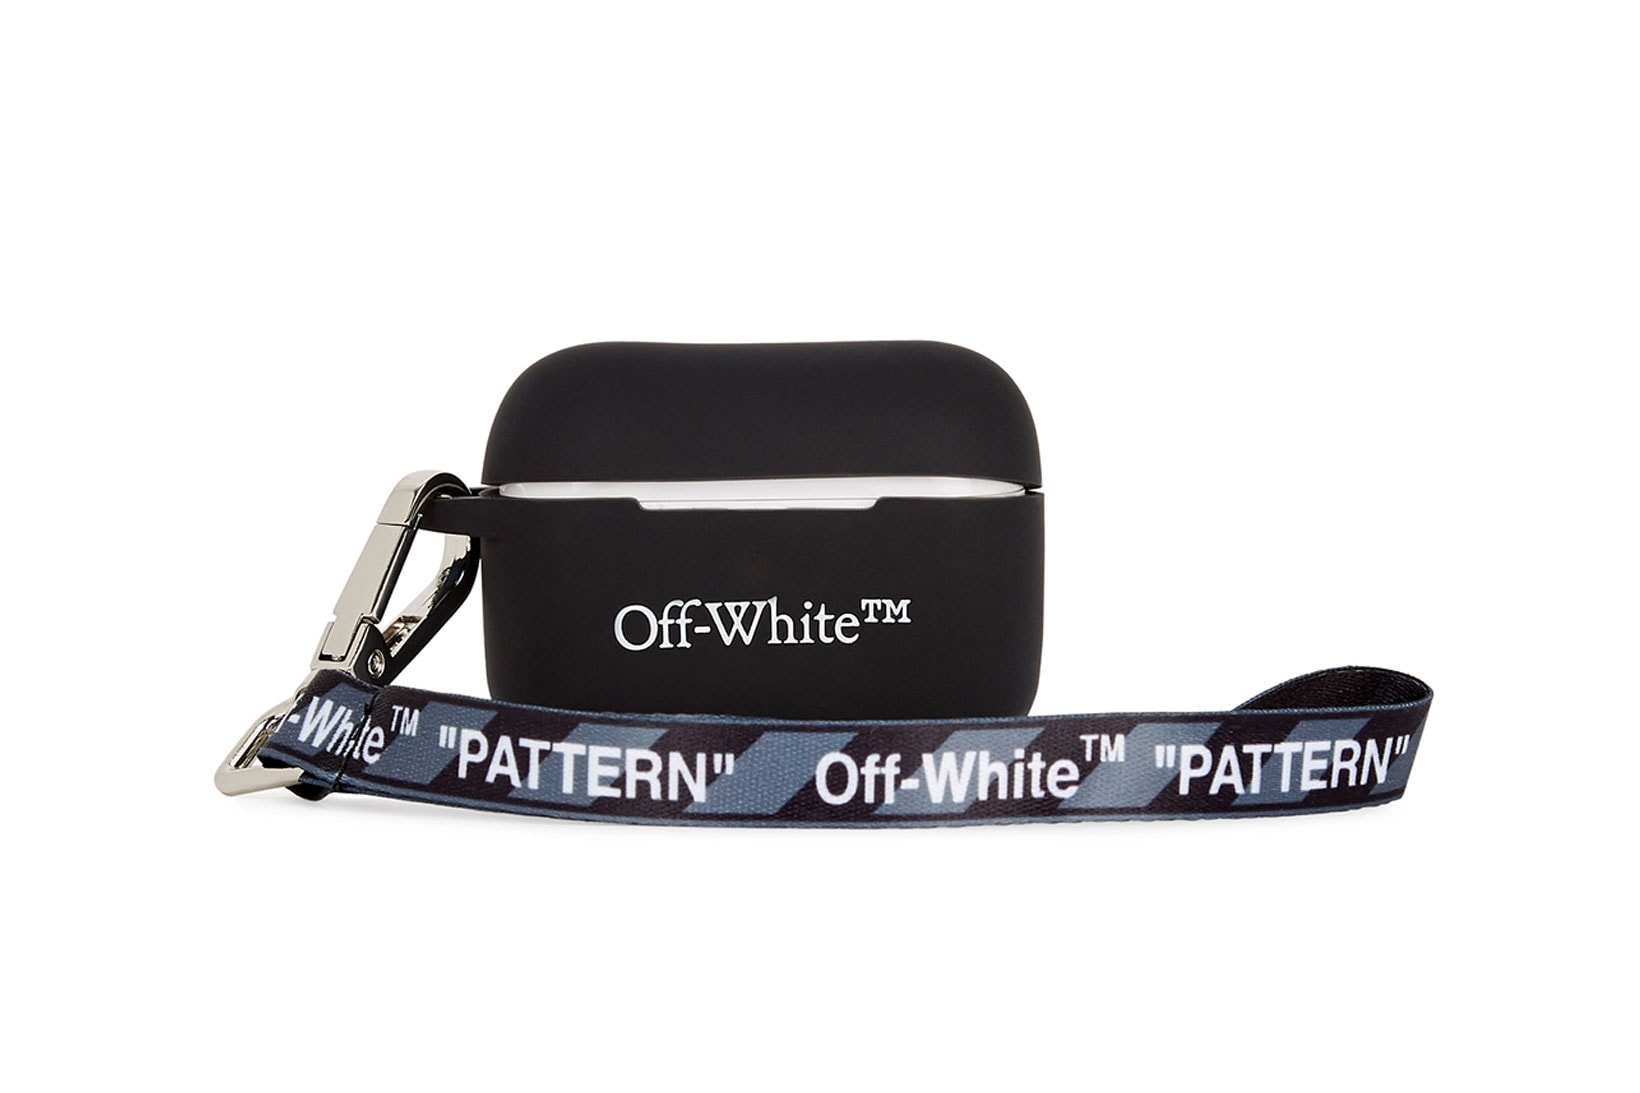 off white airpods pro cases covers black logo pattern strap